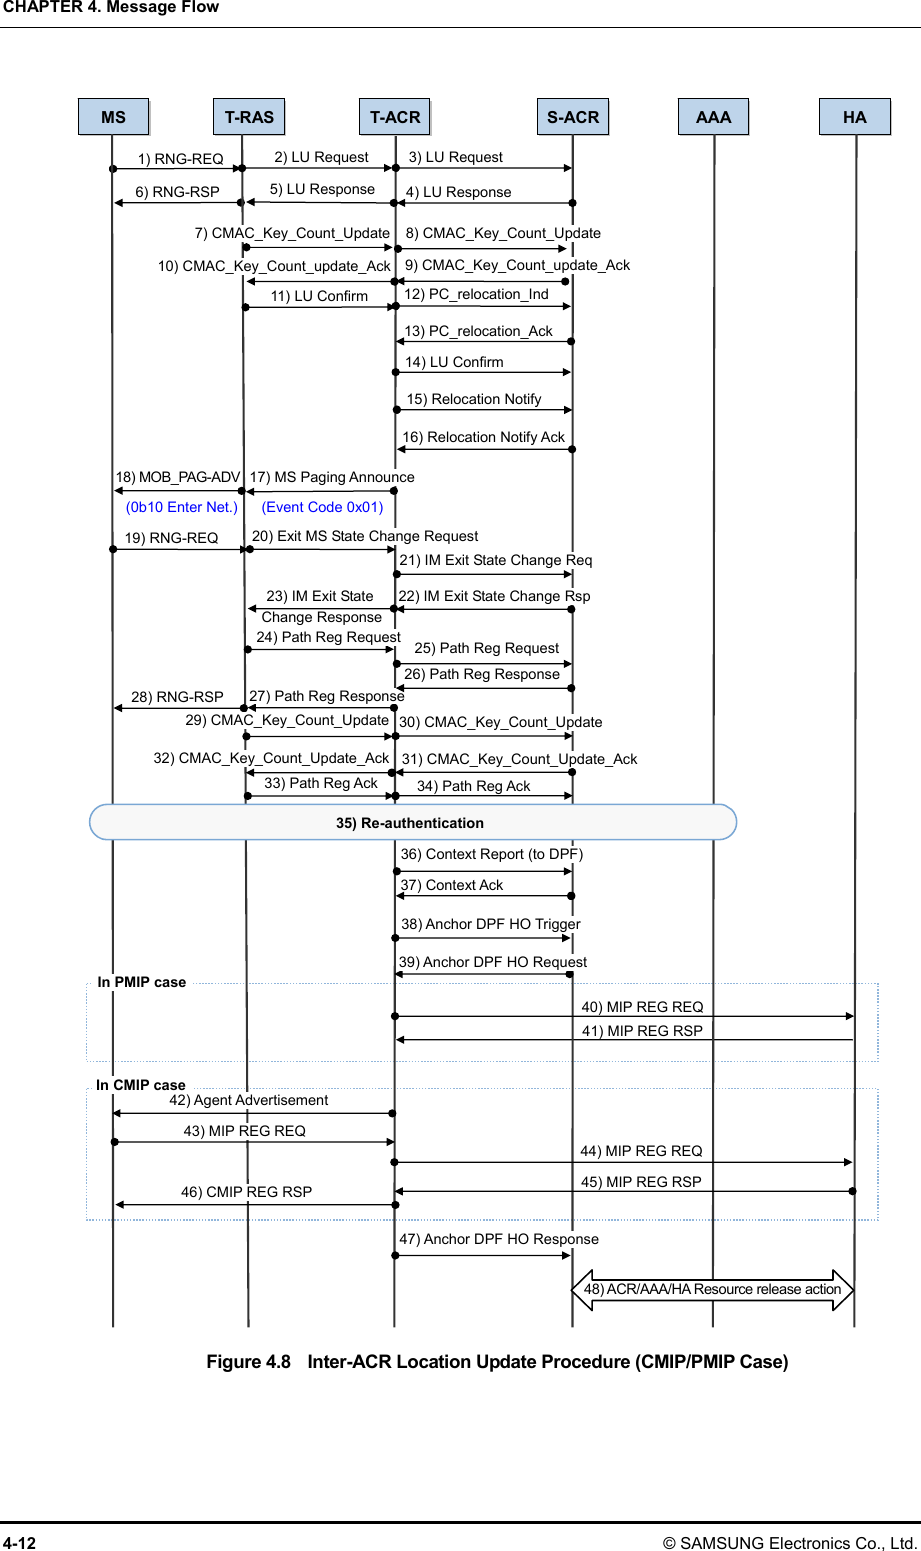 CHAPTER 4. Message Flow 4-12 © SAMSUNG Electronics Co., Ltd.  Figure 4.8    Inter-ACR Location Update Procedure (CMIP/PMIP Case) S-ACR AAA HA 1) RNG-REQ40) MIP REG REQ 41) MIP REG RSP44) MIP REG REQT-ACR2) LU Request 3) LU Request5) LU Response 4) LU Response11) LU Confirm14) LU Confirm12) PC_relocation_Ind13) PC_relocation_Ack15) Relocation Notify38) Anchor DPF HO Trigger16) Relocation Notify Ack39) Anchor DPF HO Request17) MS Paging Announce20) Exit MS State Change Request19) RNG-REQ 18) MOB_PAG-ADV 28) RNG-RSP(0b10 Enter Net.) (Event Code 0x01)23) IM Exit State 21) IM Exit State Change Req22) IM Exit State Change Rsp24) Path Reg Request33) Path Reg Ack27) Path Reg Response26) Path Reg Response25) Path Reg Request37) Context Ack36) Context Report (to DPF)35) Re-authenticationIn PMIP case 42) Agent Advertisement 43) MIP REG REQ 45) MIP REG RSP46) CMIP REG RSP 47) Anchor DPF HO Response48) ACR/AAA/HA Resource release action 6) RNG-RSP7) CMAC_Key_Count_Update10) CMAC_Key_Count_update_AckMS T-RAS Change Response 8) CMAC_Key_Count_Update9) CMAC_Key_Count_update_Ack29) CMAC_Key_Count_Update32) CMAC_Key_Count_Update_Ack30) CMAC_Key_Count_Update31) CMAC_Key_Count_Update_Ack34) Path Reg AckIn CMIP case 